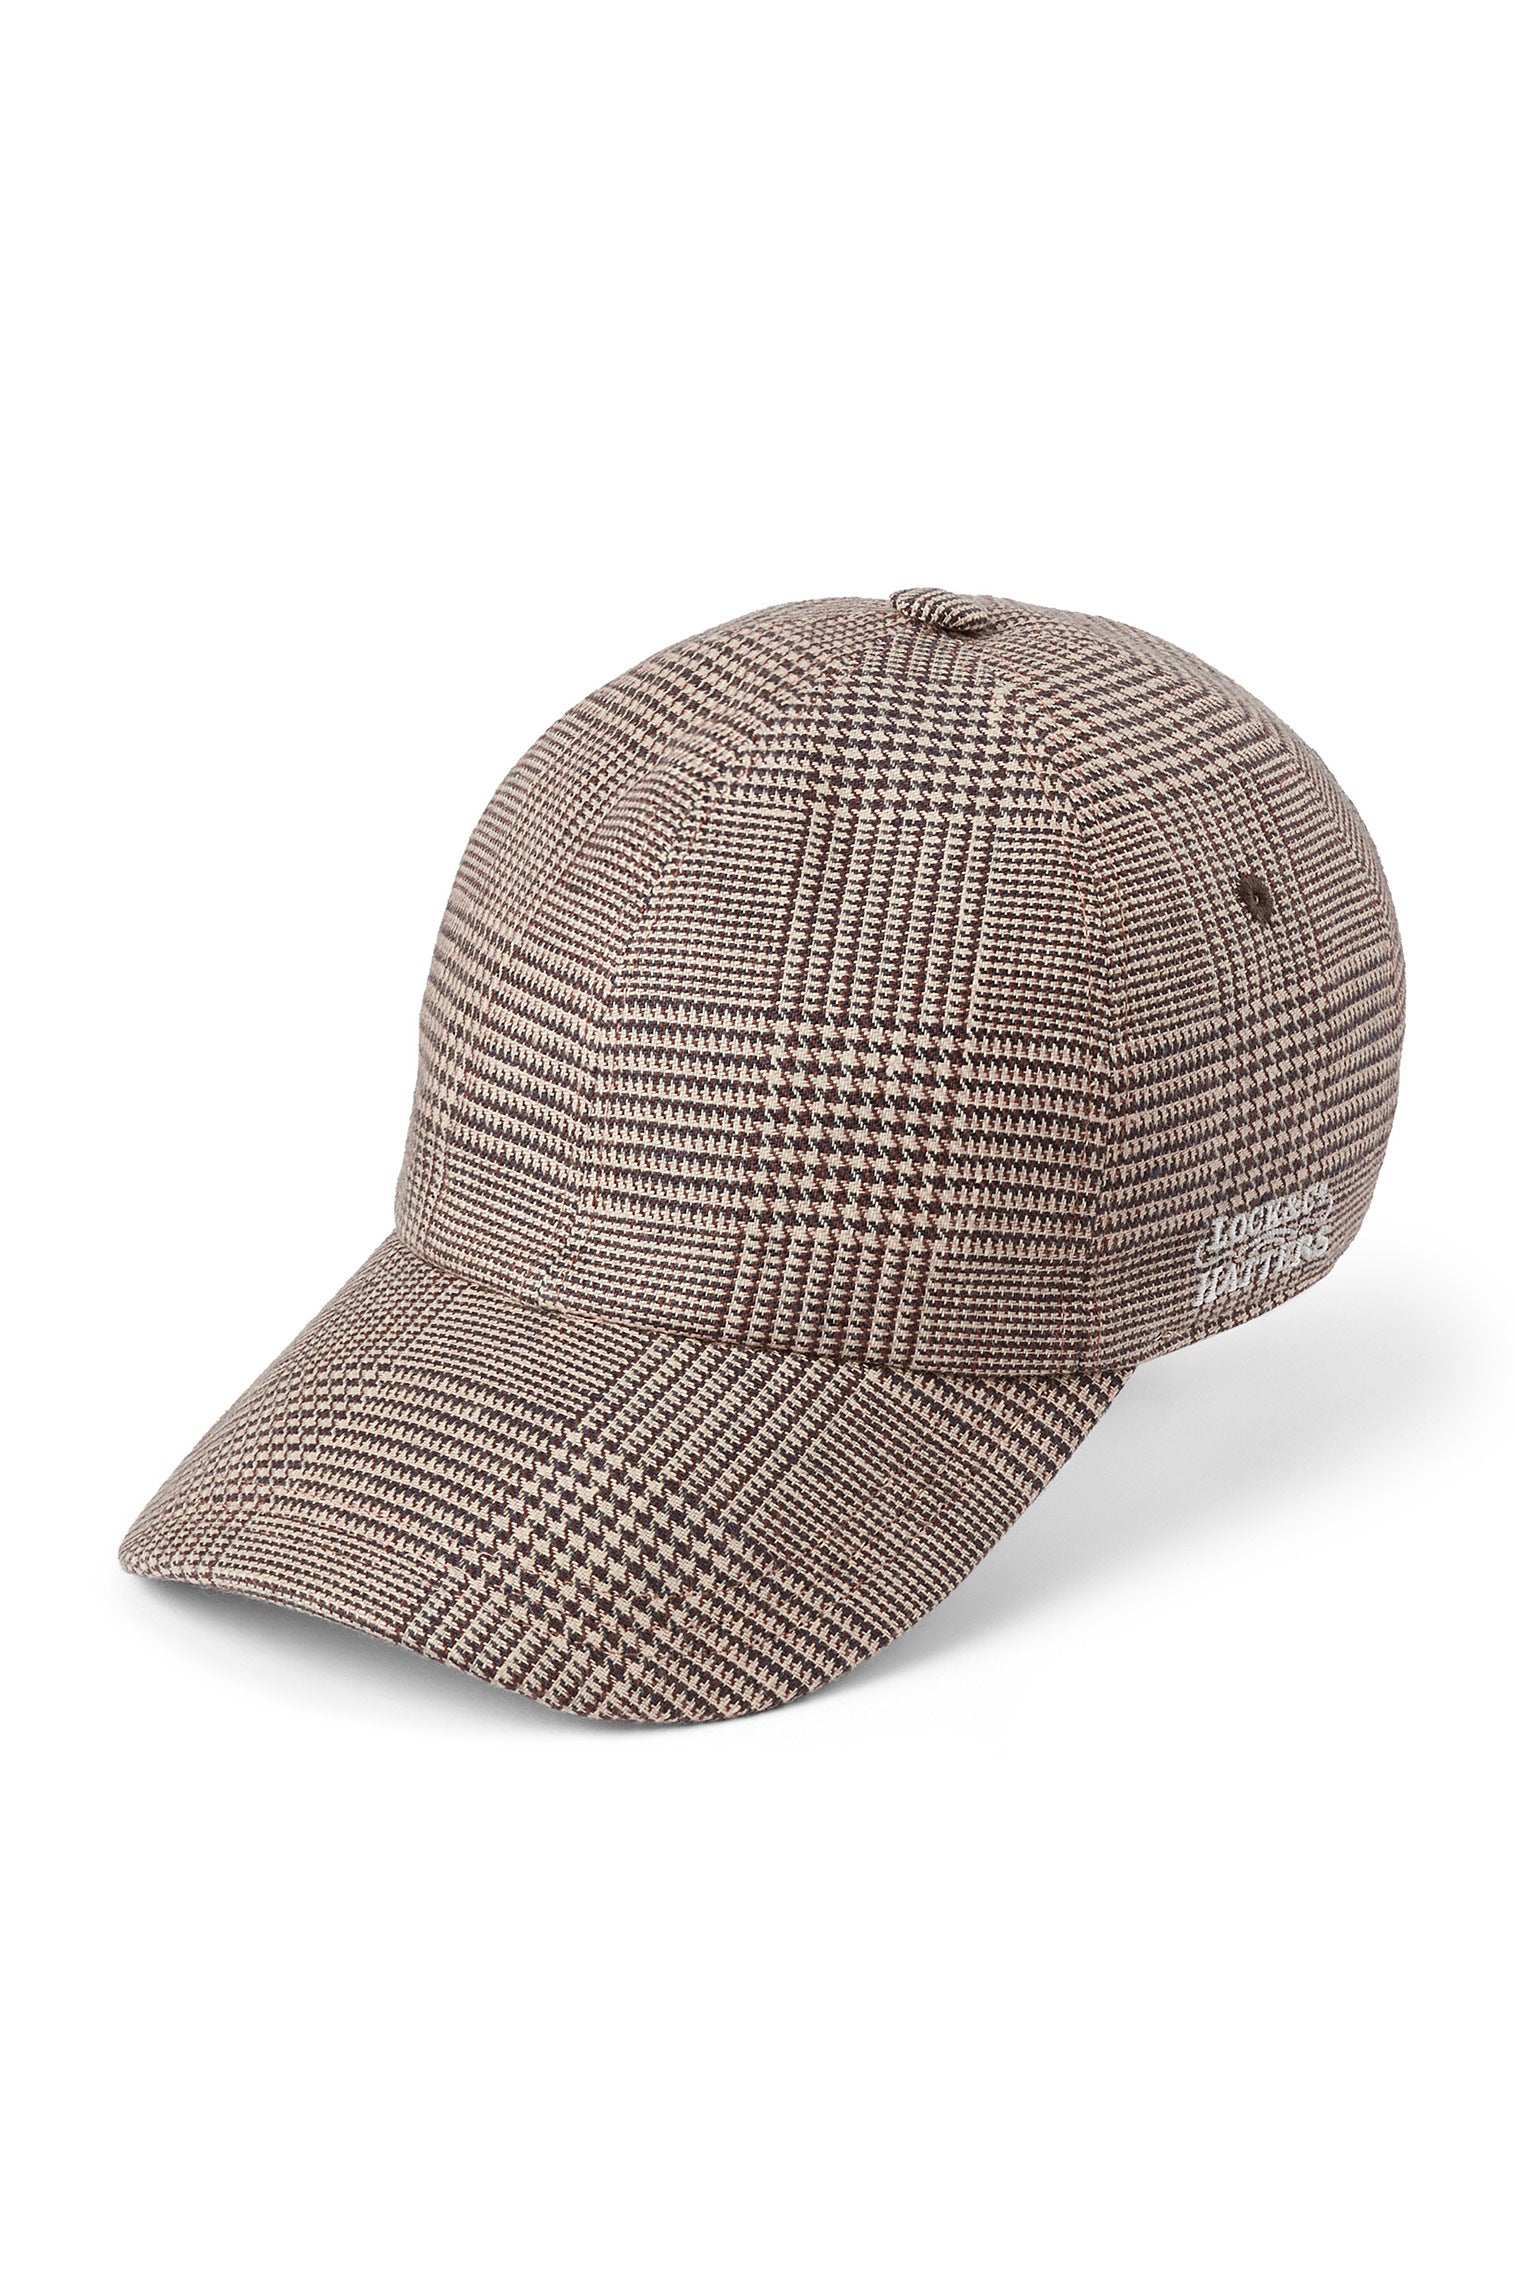 Adjustable Check Baseball Cap - Father's Day Gift Guide - Lock & Co. Hatters London UK